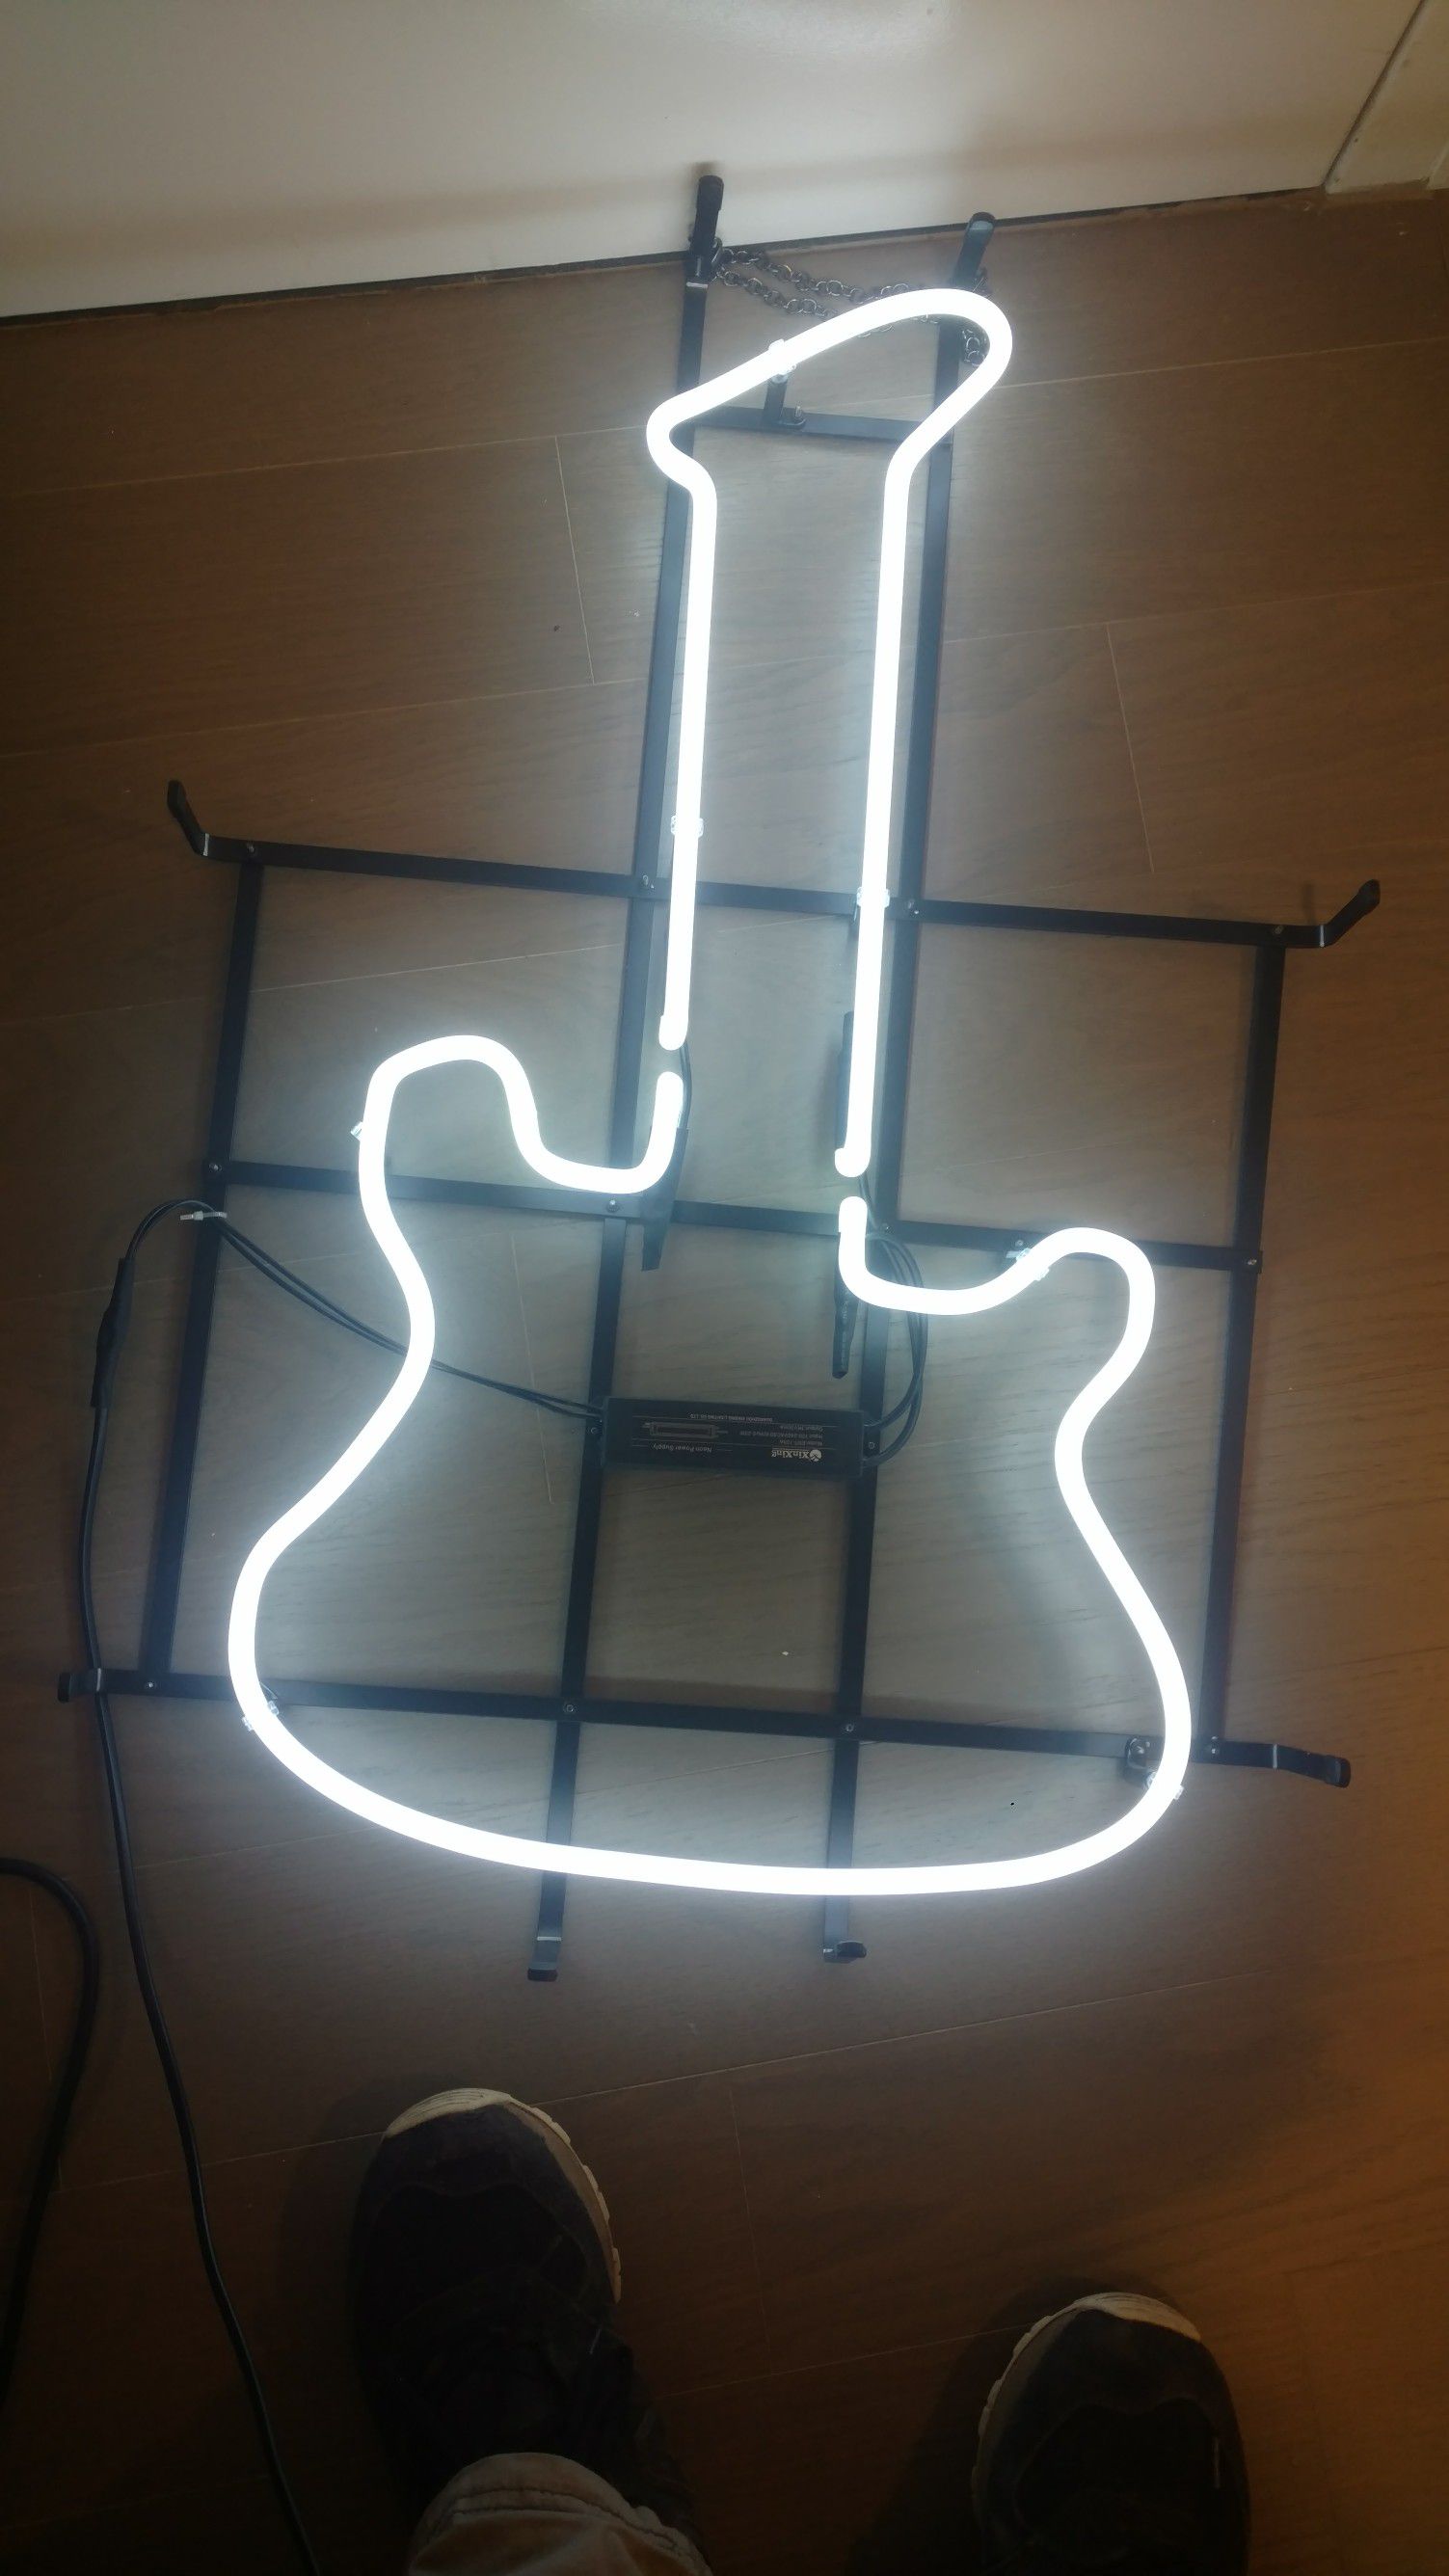 Guitar neon light. Stands at 2 n half ft tall. And is 2ft wide.